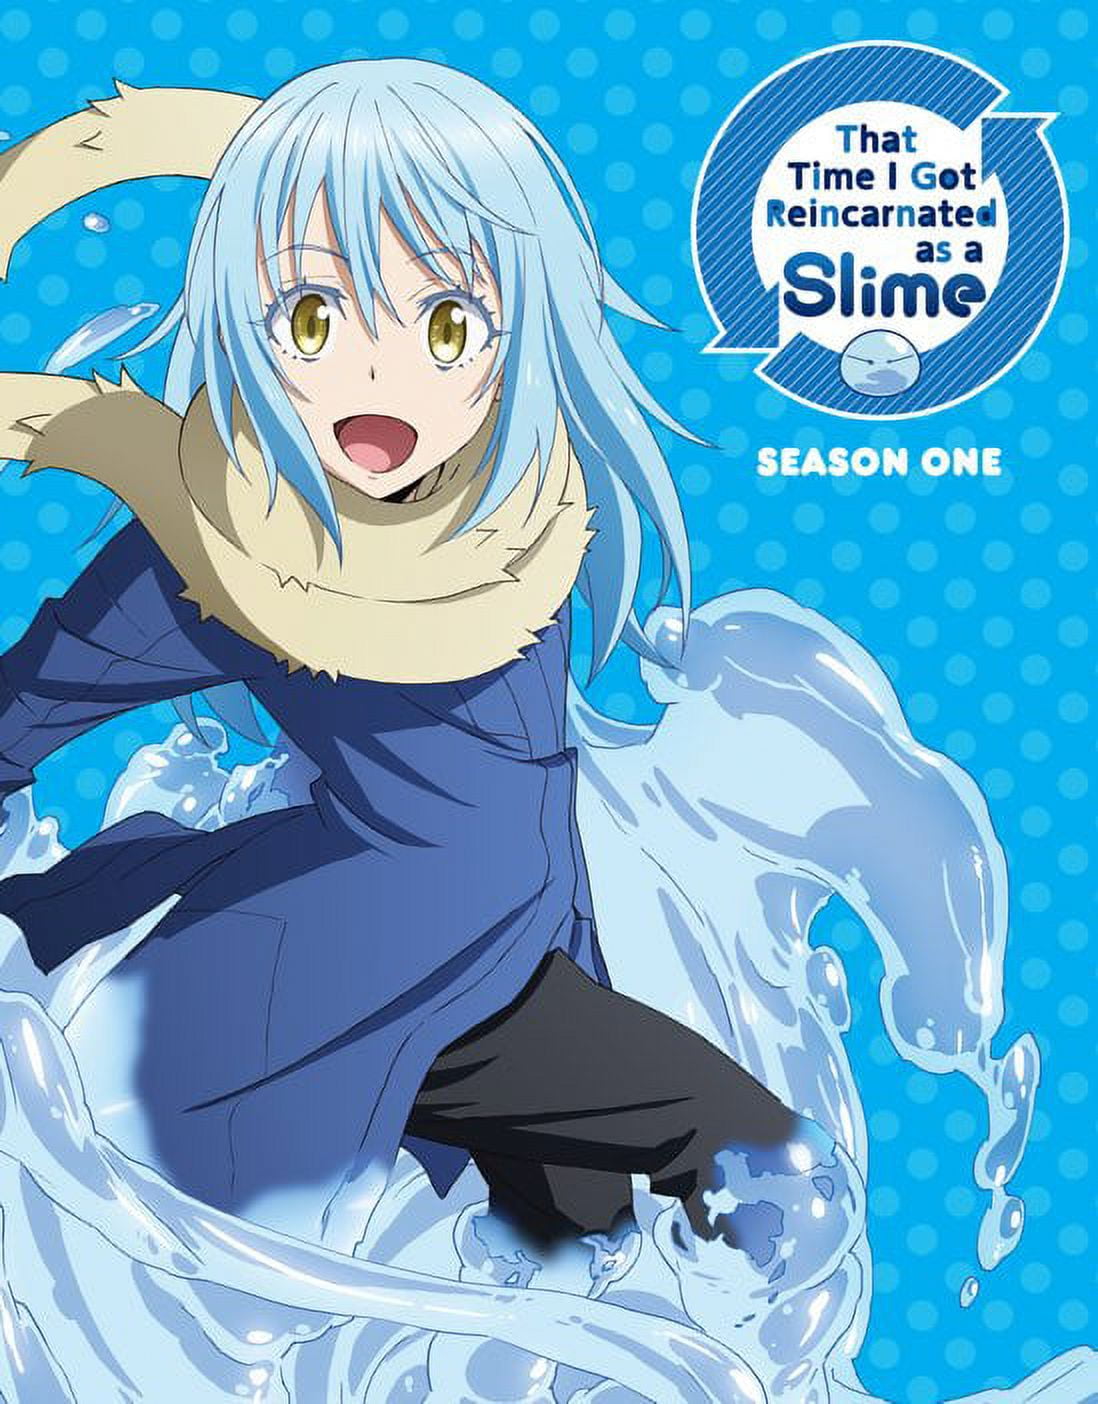 TV Time - That Time I Got Reincarnated as a Slime (TVShow Time)